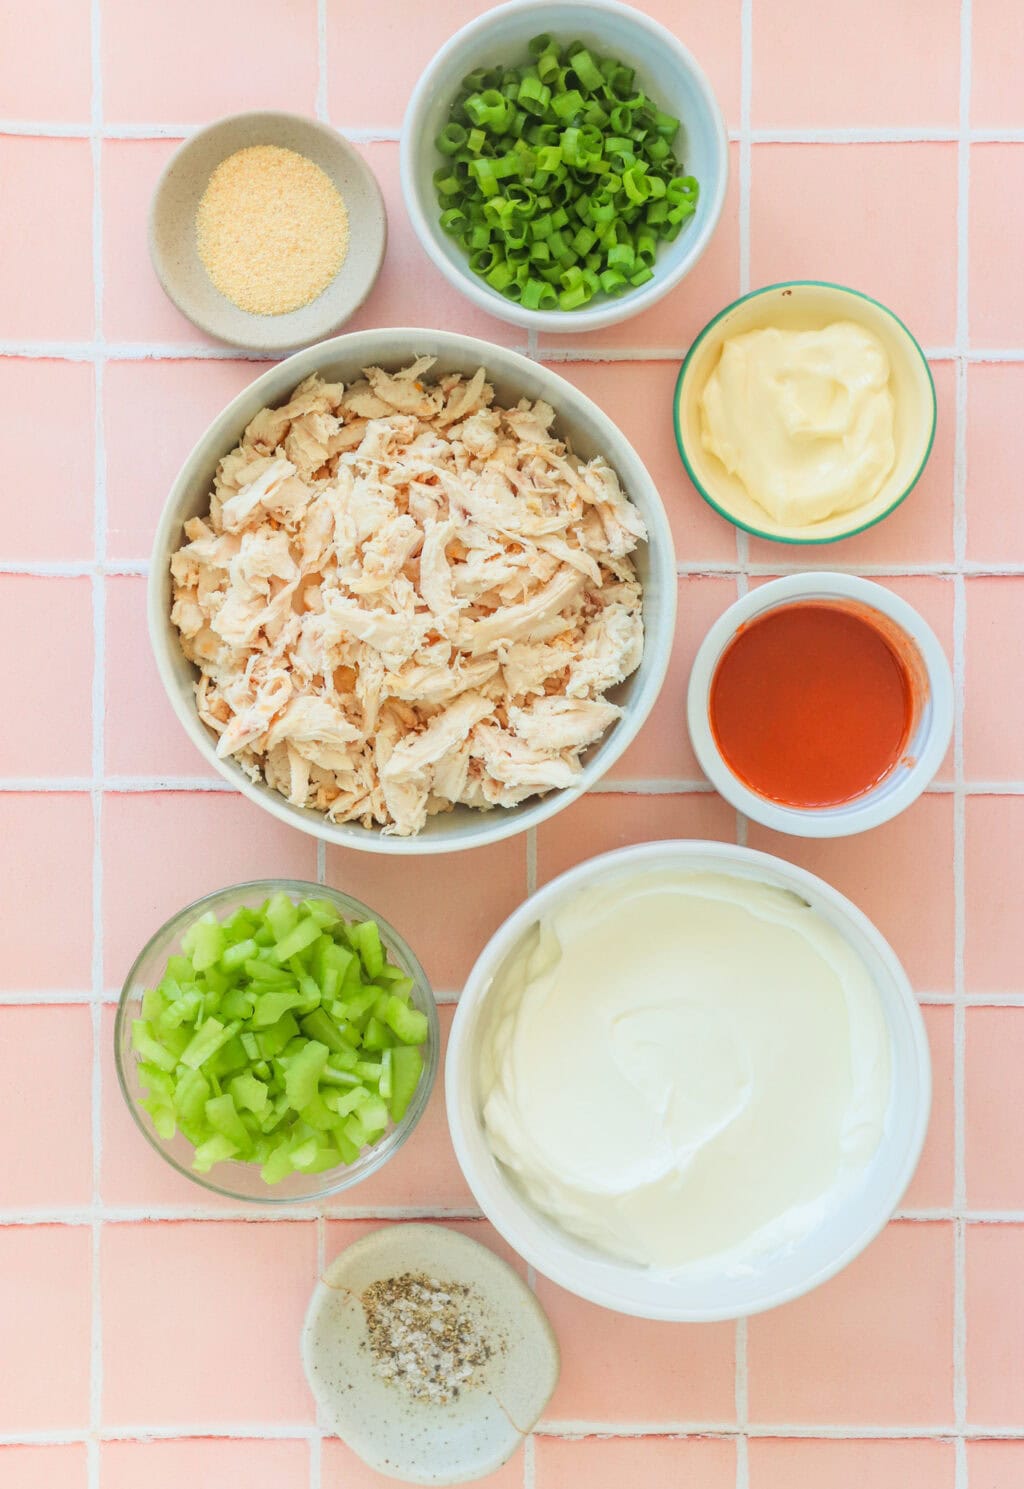 Ingredients for Quick Buffalo Chicken Salad with Greek Yogurt in small white bowls including cooked shredded chicken, Greek yogurt, mayo, Frank's Red Hot Original Sauce, garlic powder, green onions, blue cheese, pepper